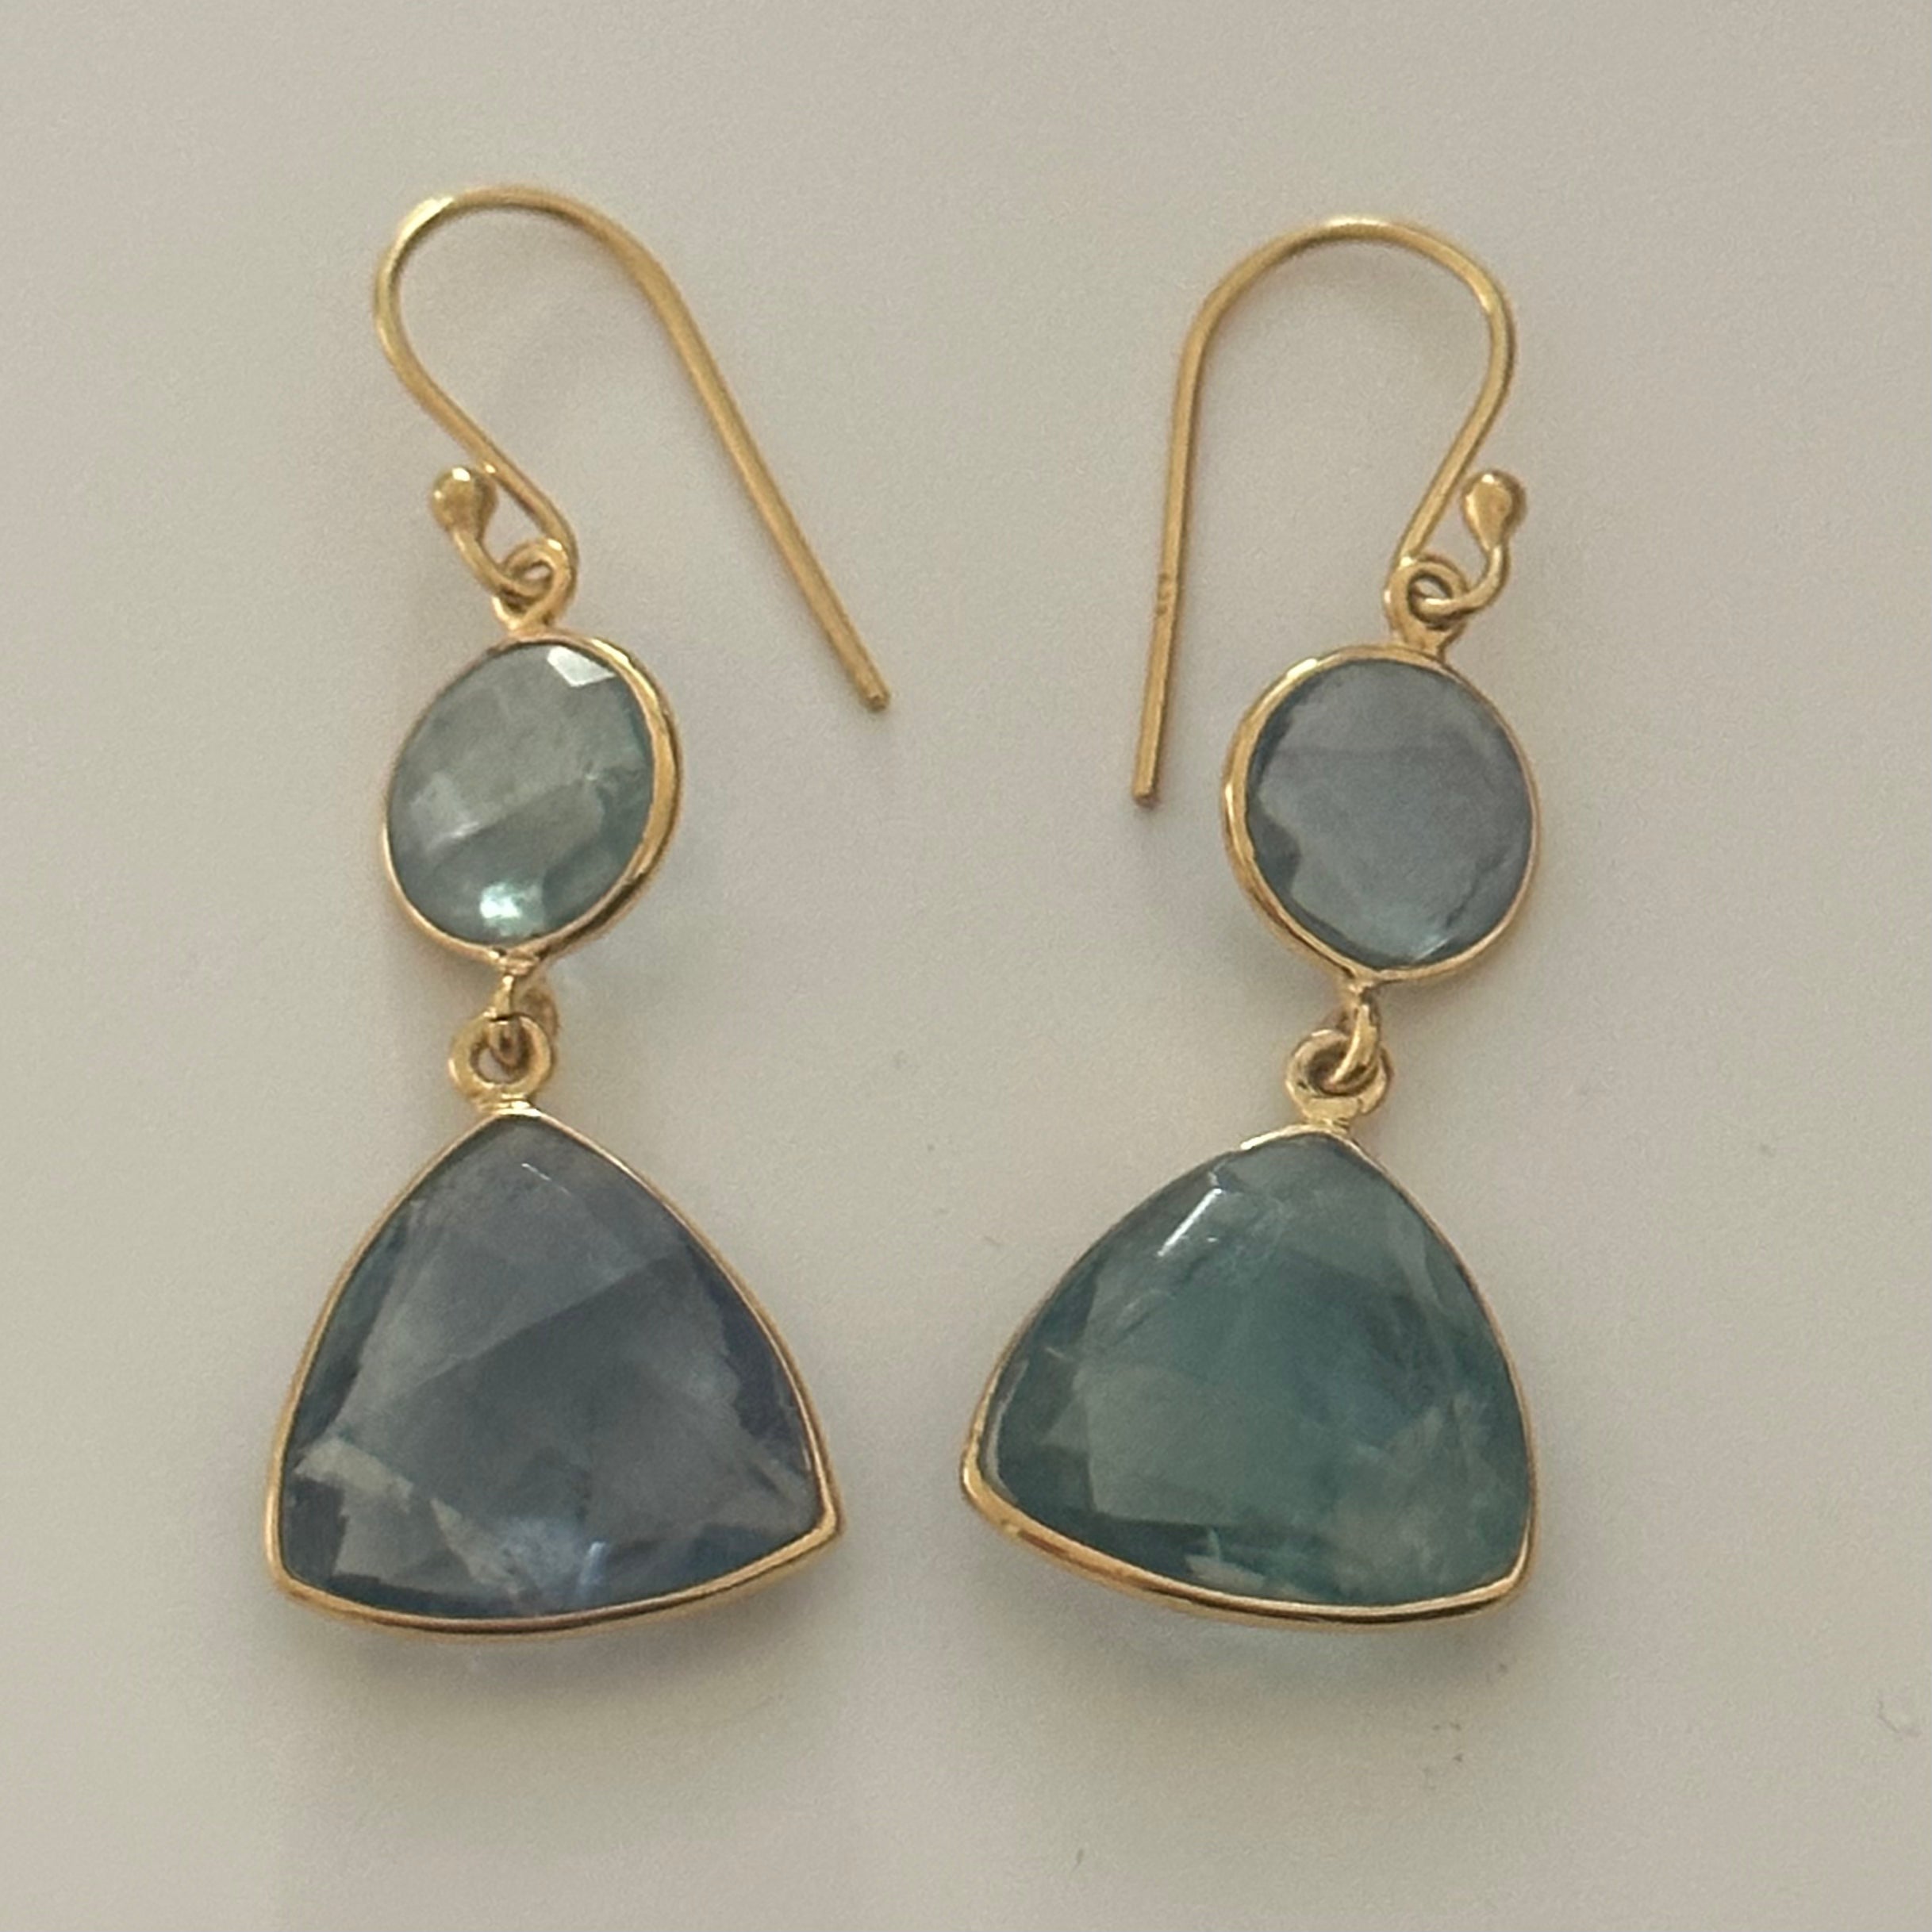 Apatite Gemstone Earrings in Gold Plated Sterling Silver - Triangular